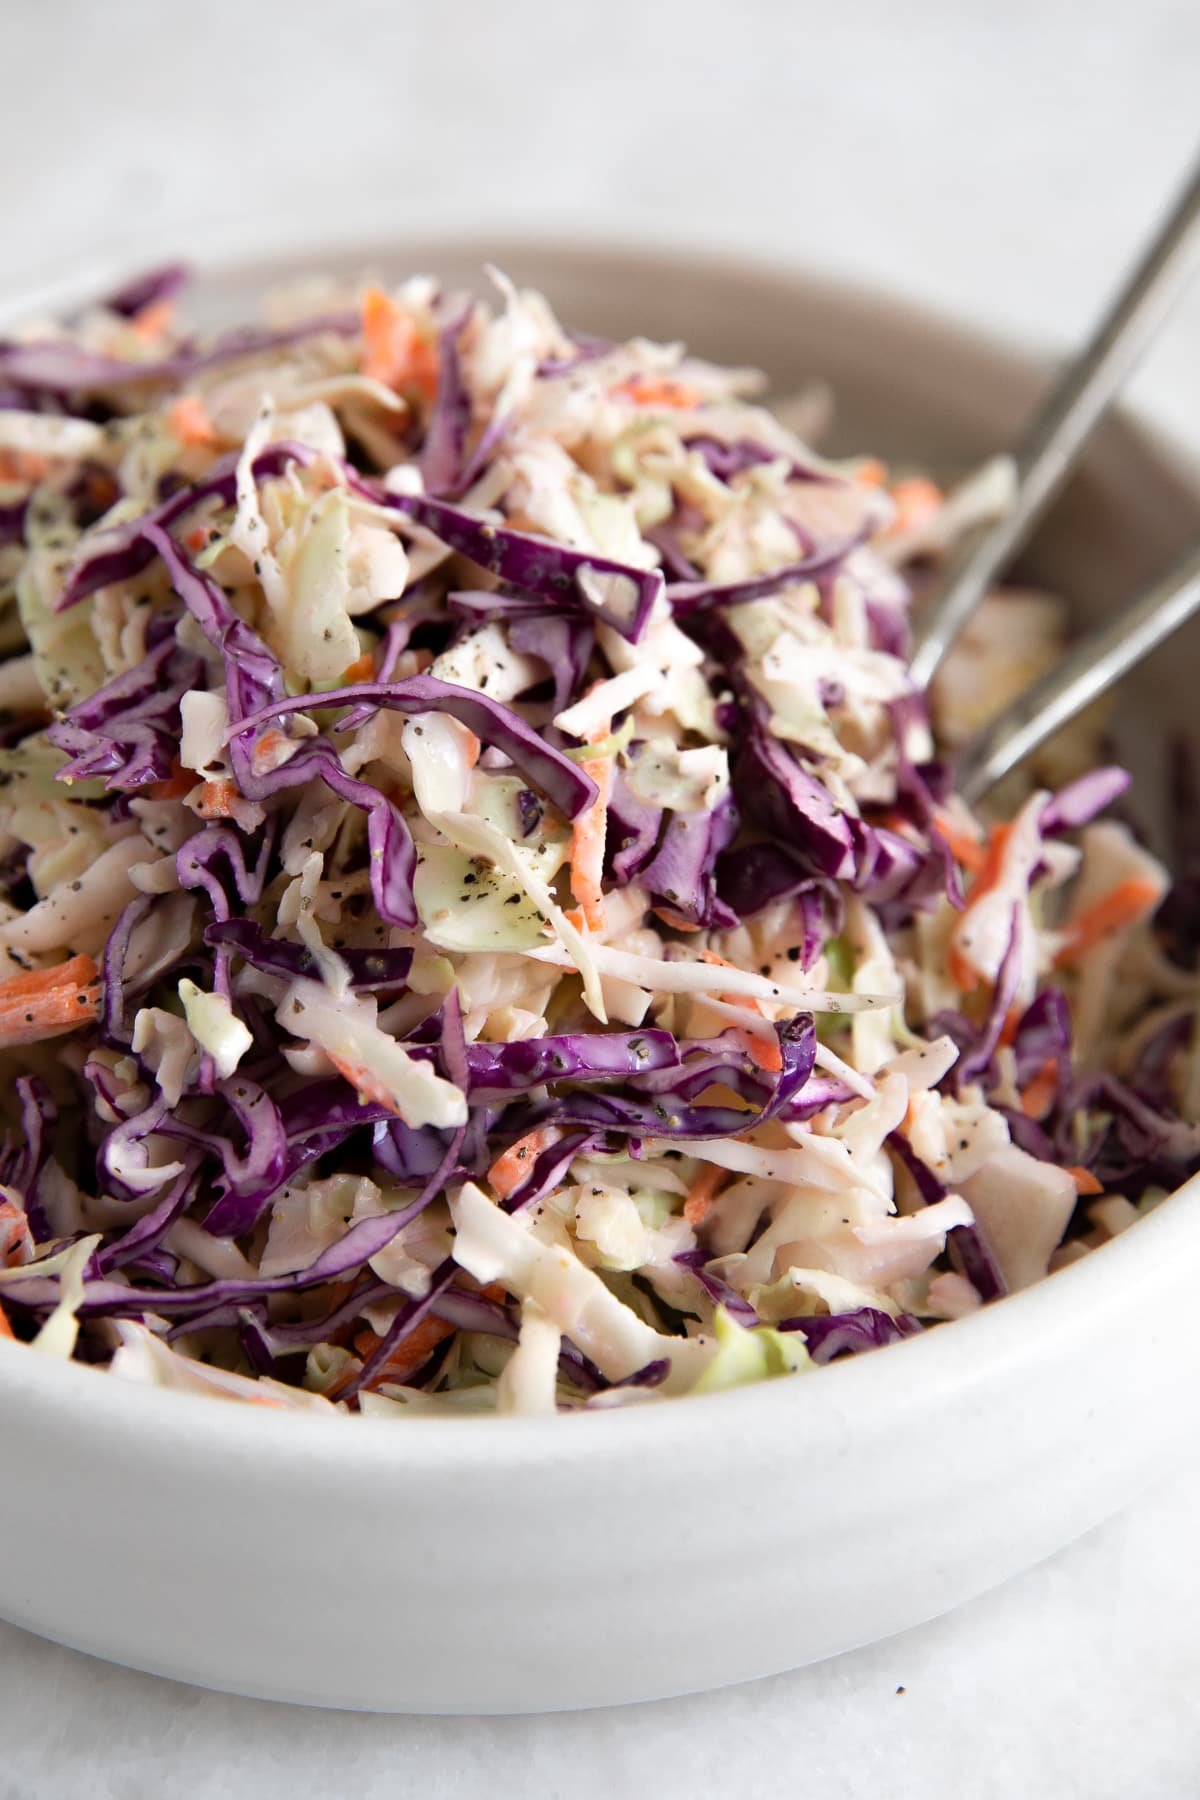 Large white shallow serving bowl filled with creamy classic coleslaw.